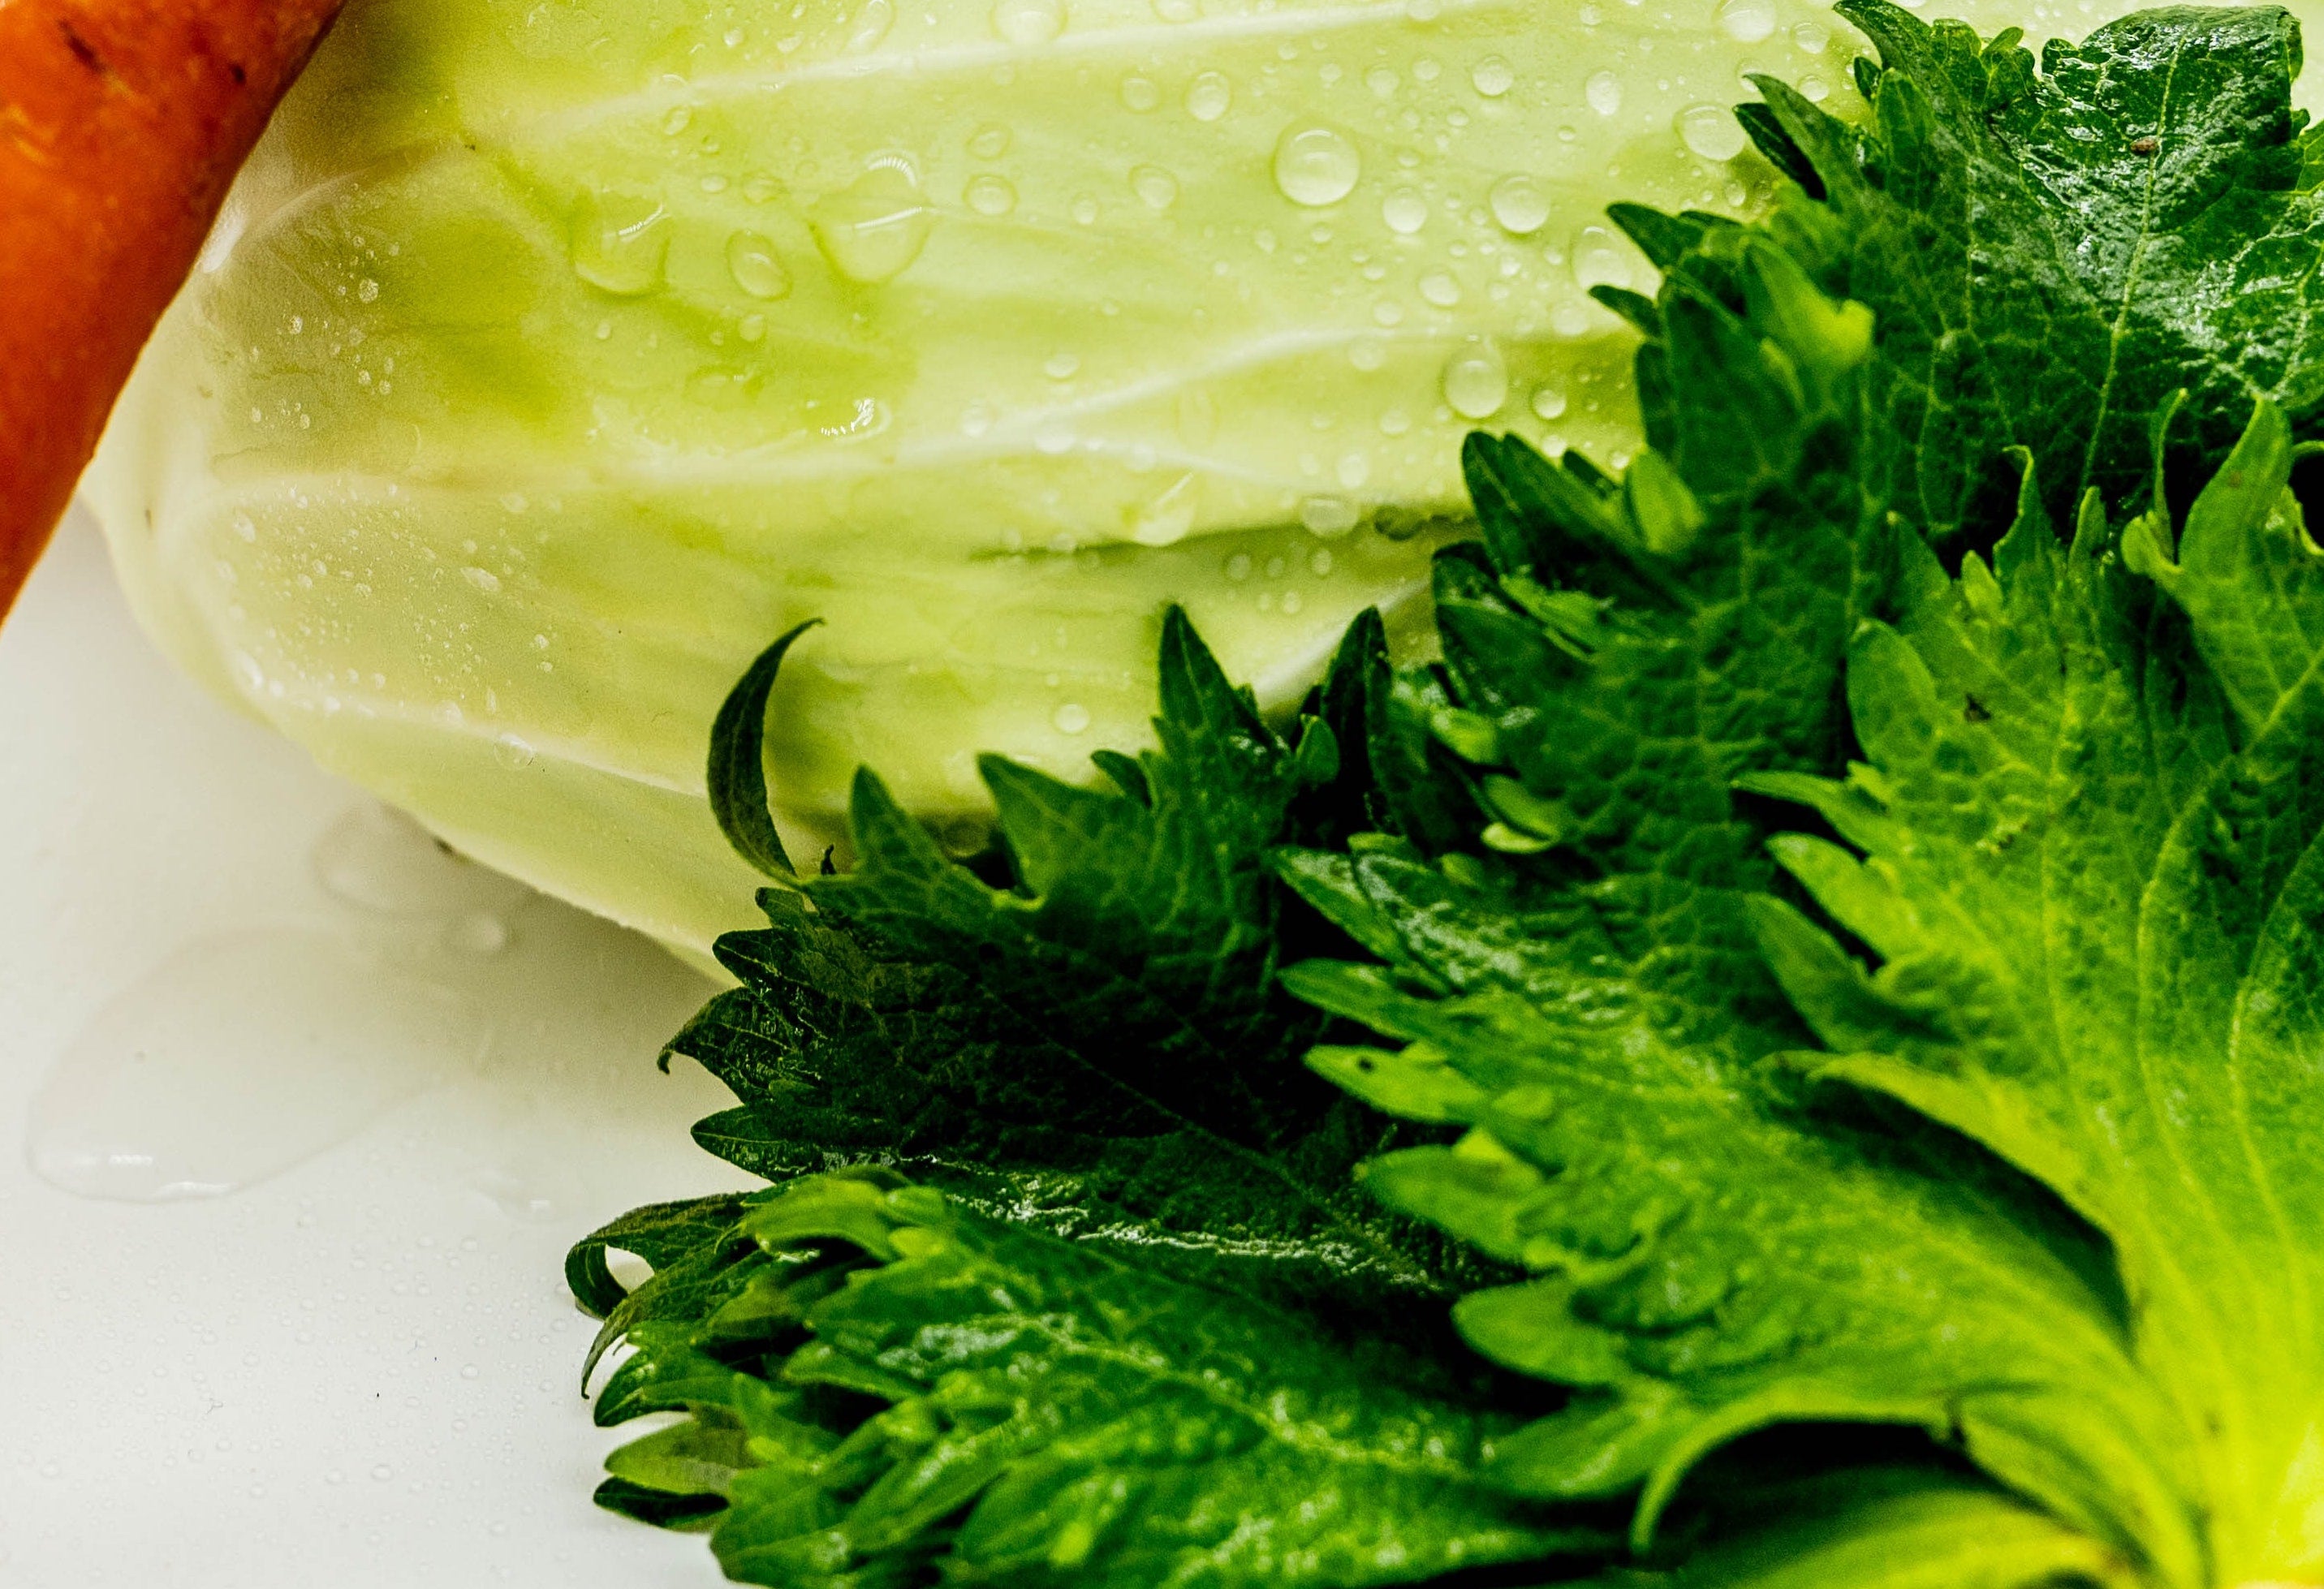 Perilla is often used in cuisines in several Asian countries. It is also a salad green.  (Photo: ibuki Tsubo/Unsplash)